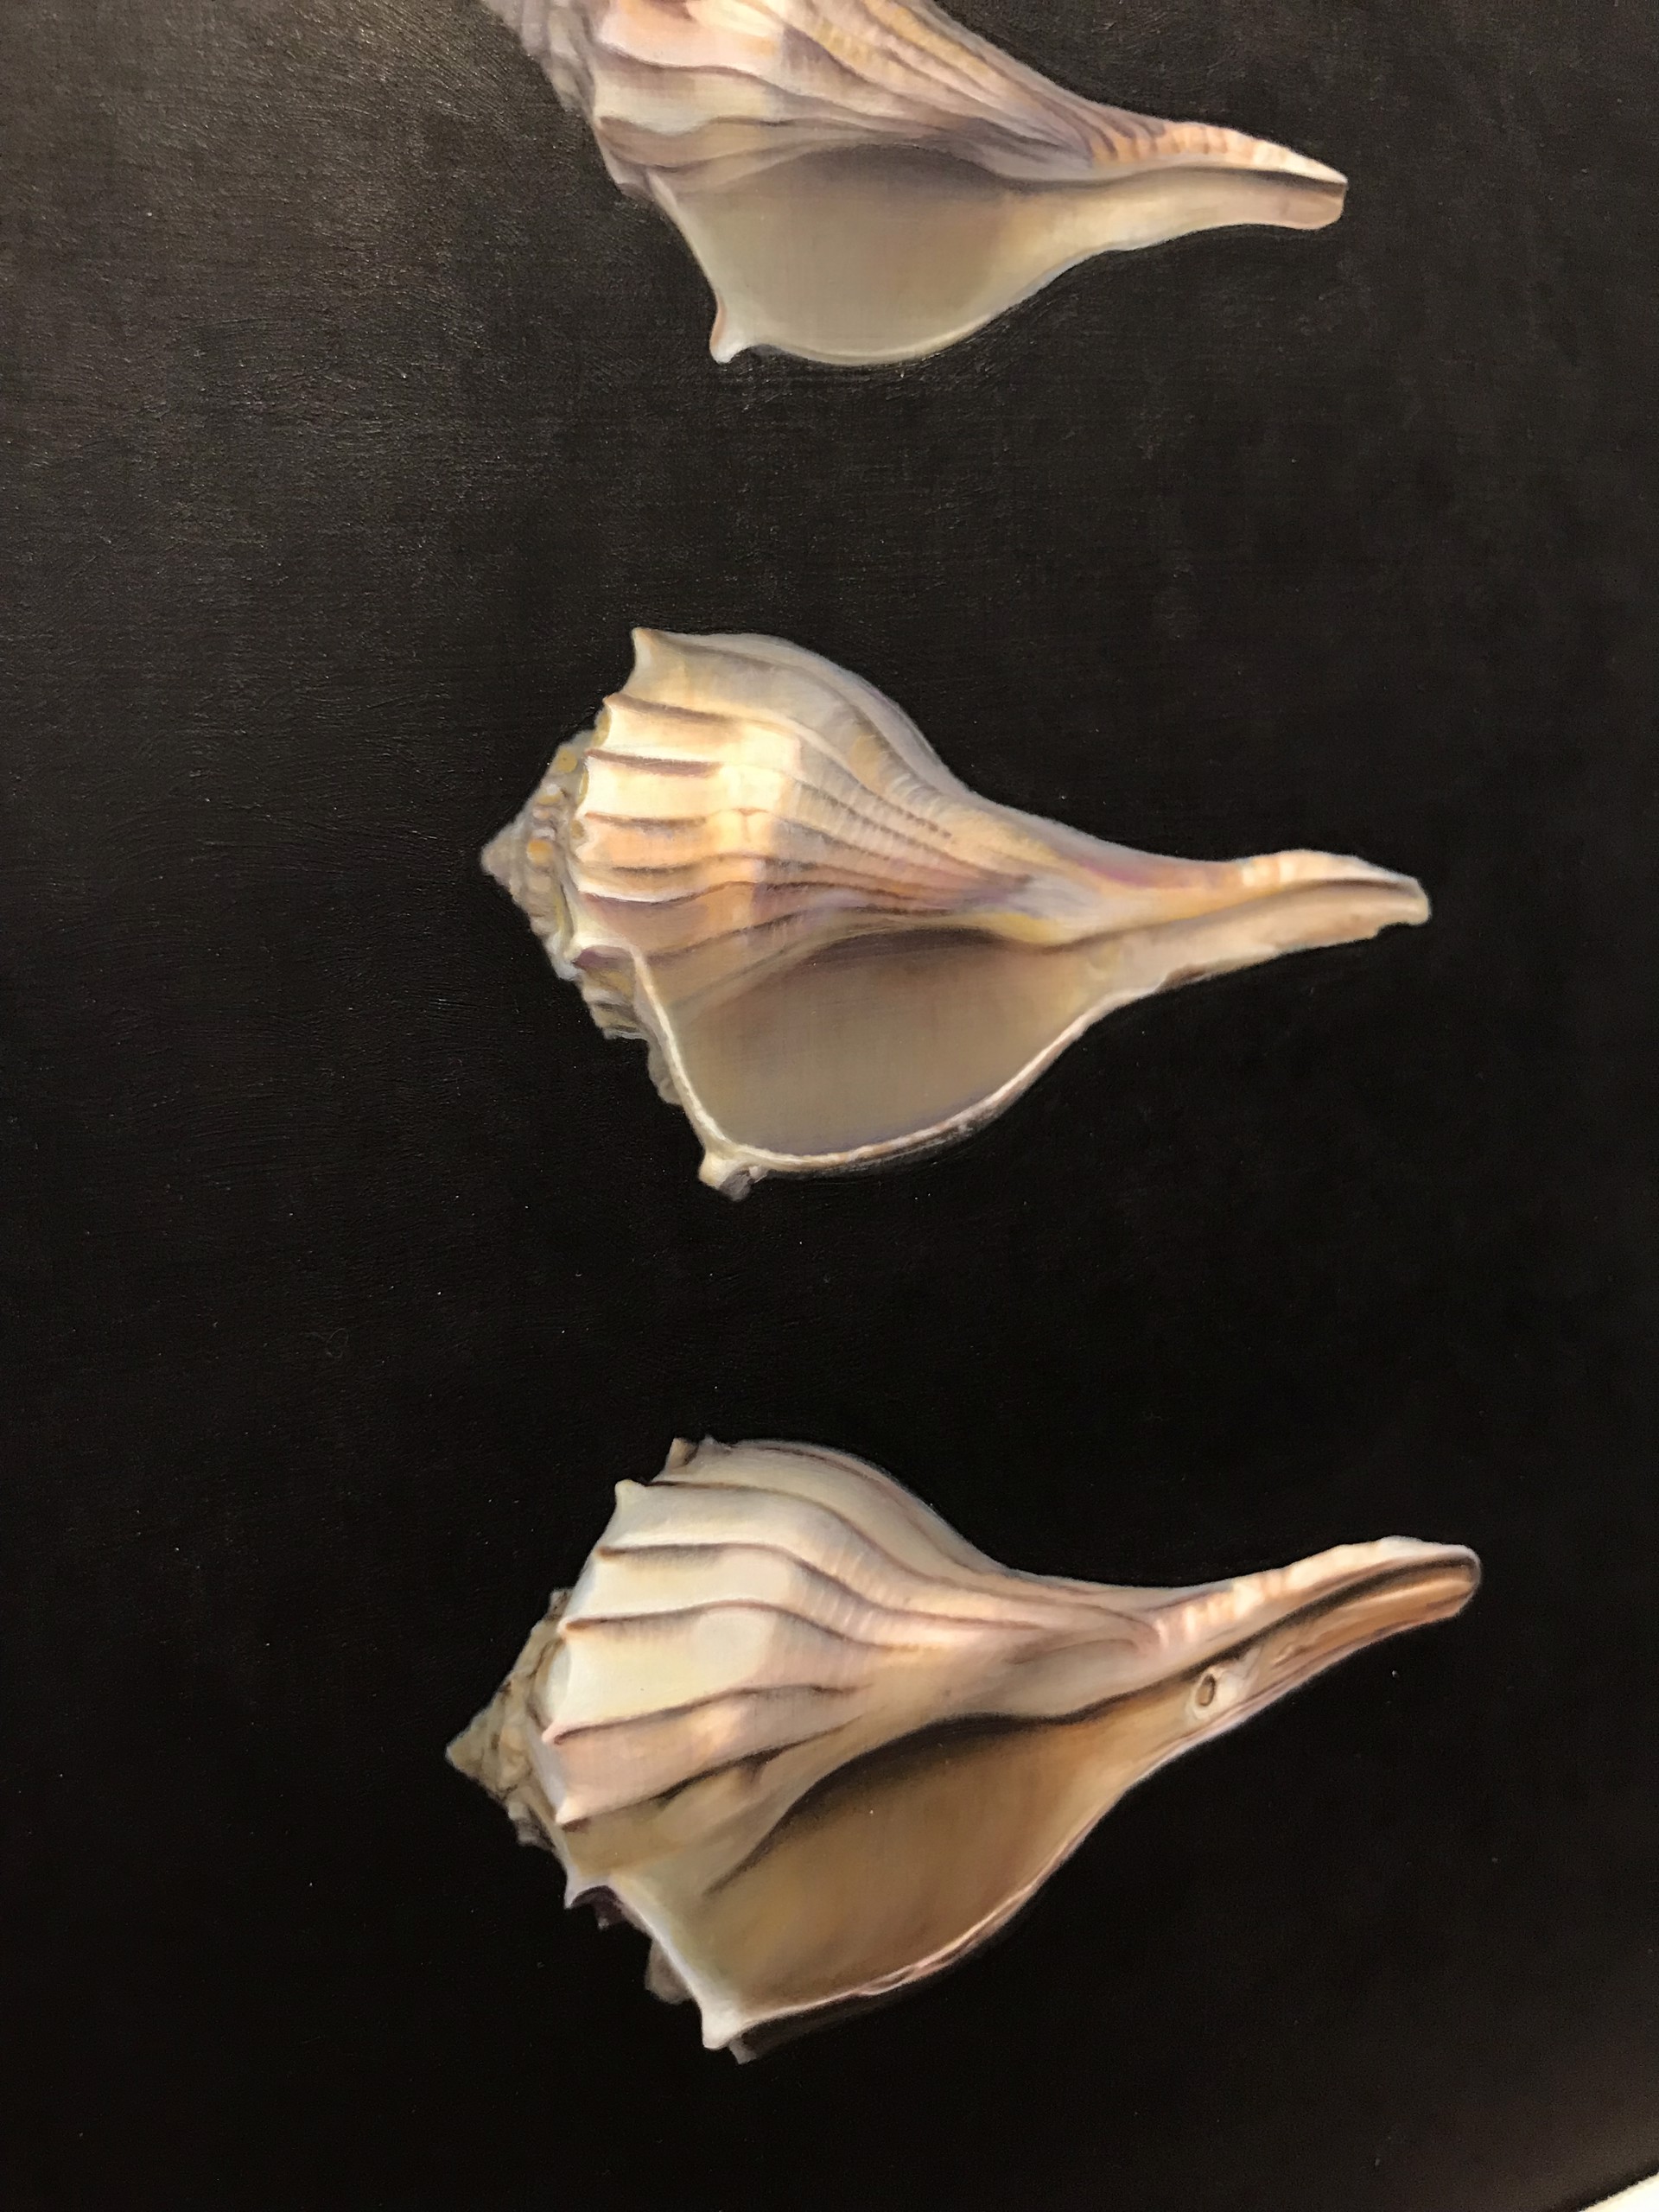 Four Shells by Tilly Woodward